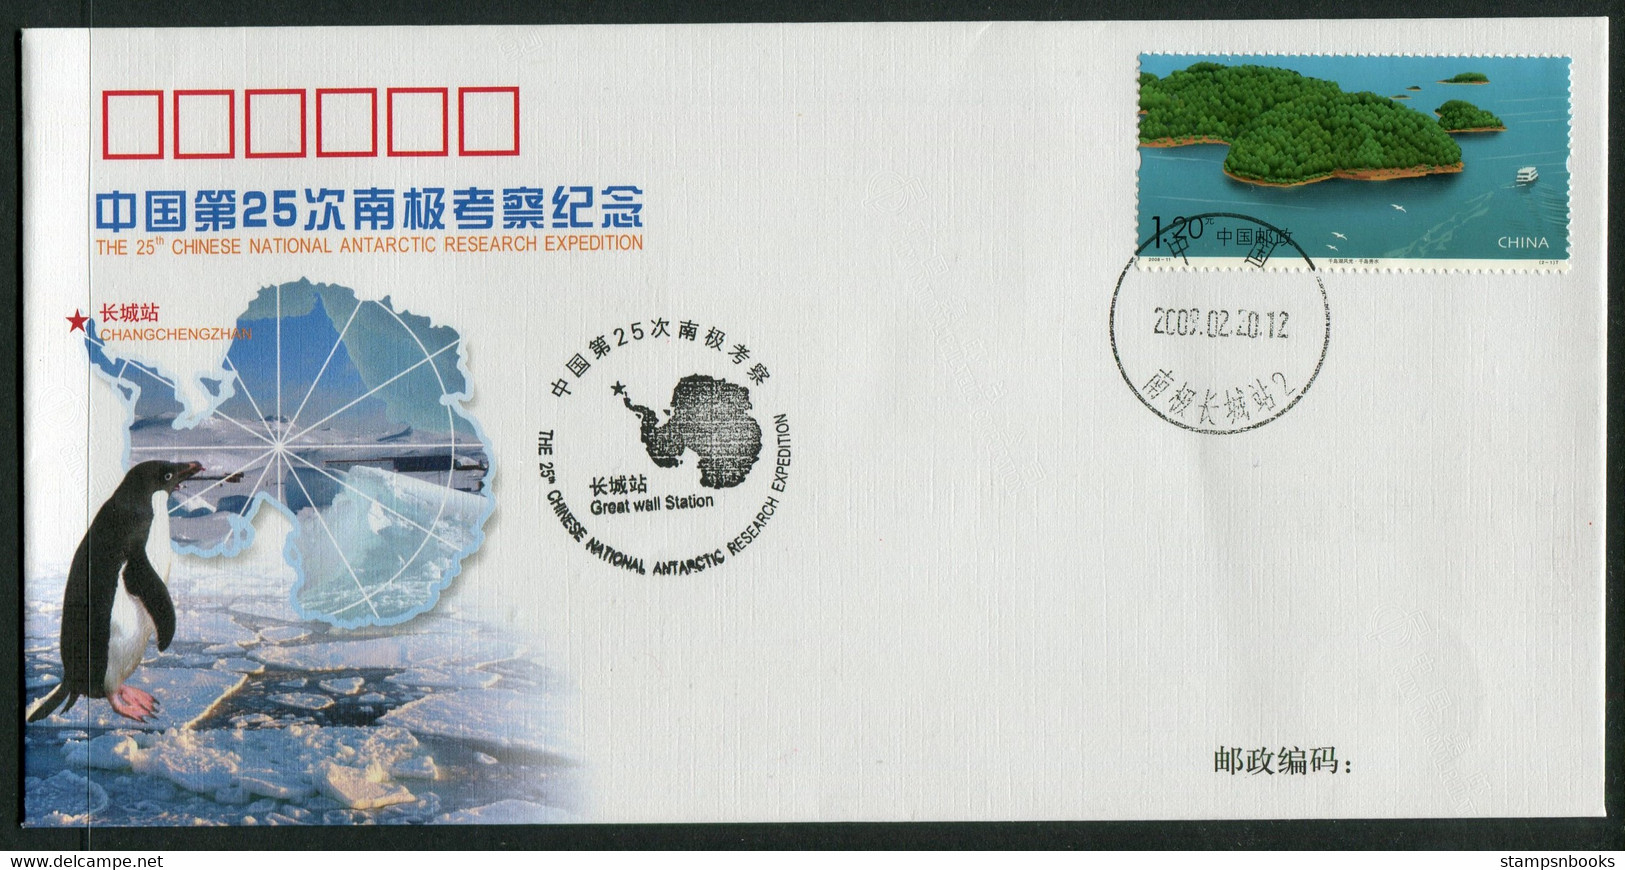 2008/9 China 25th Chinese National Antarctic Research Expedition X 3 Polar Antarctica Penquin Ship Covers - Forschungsprogramme